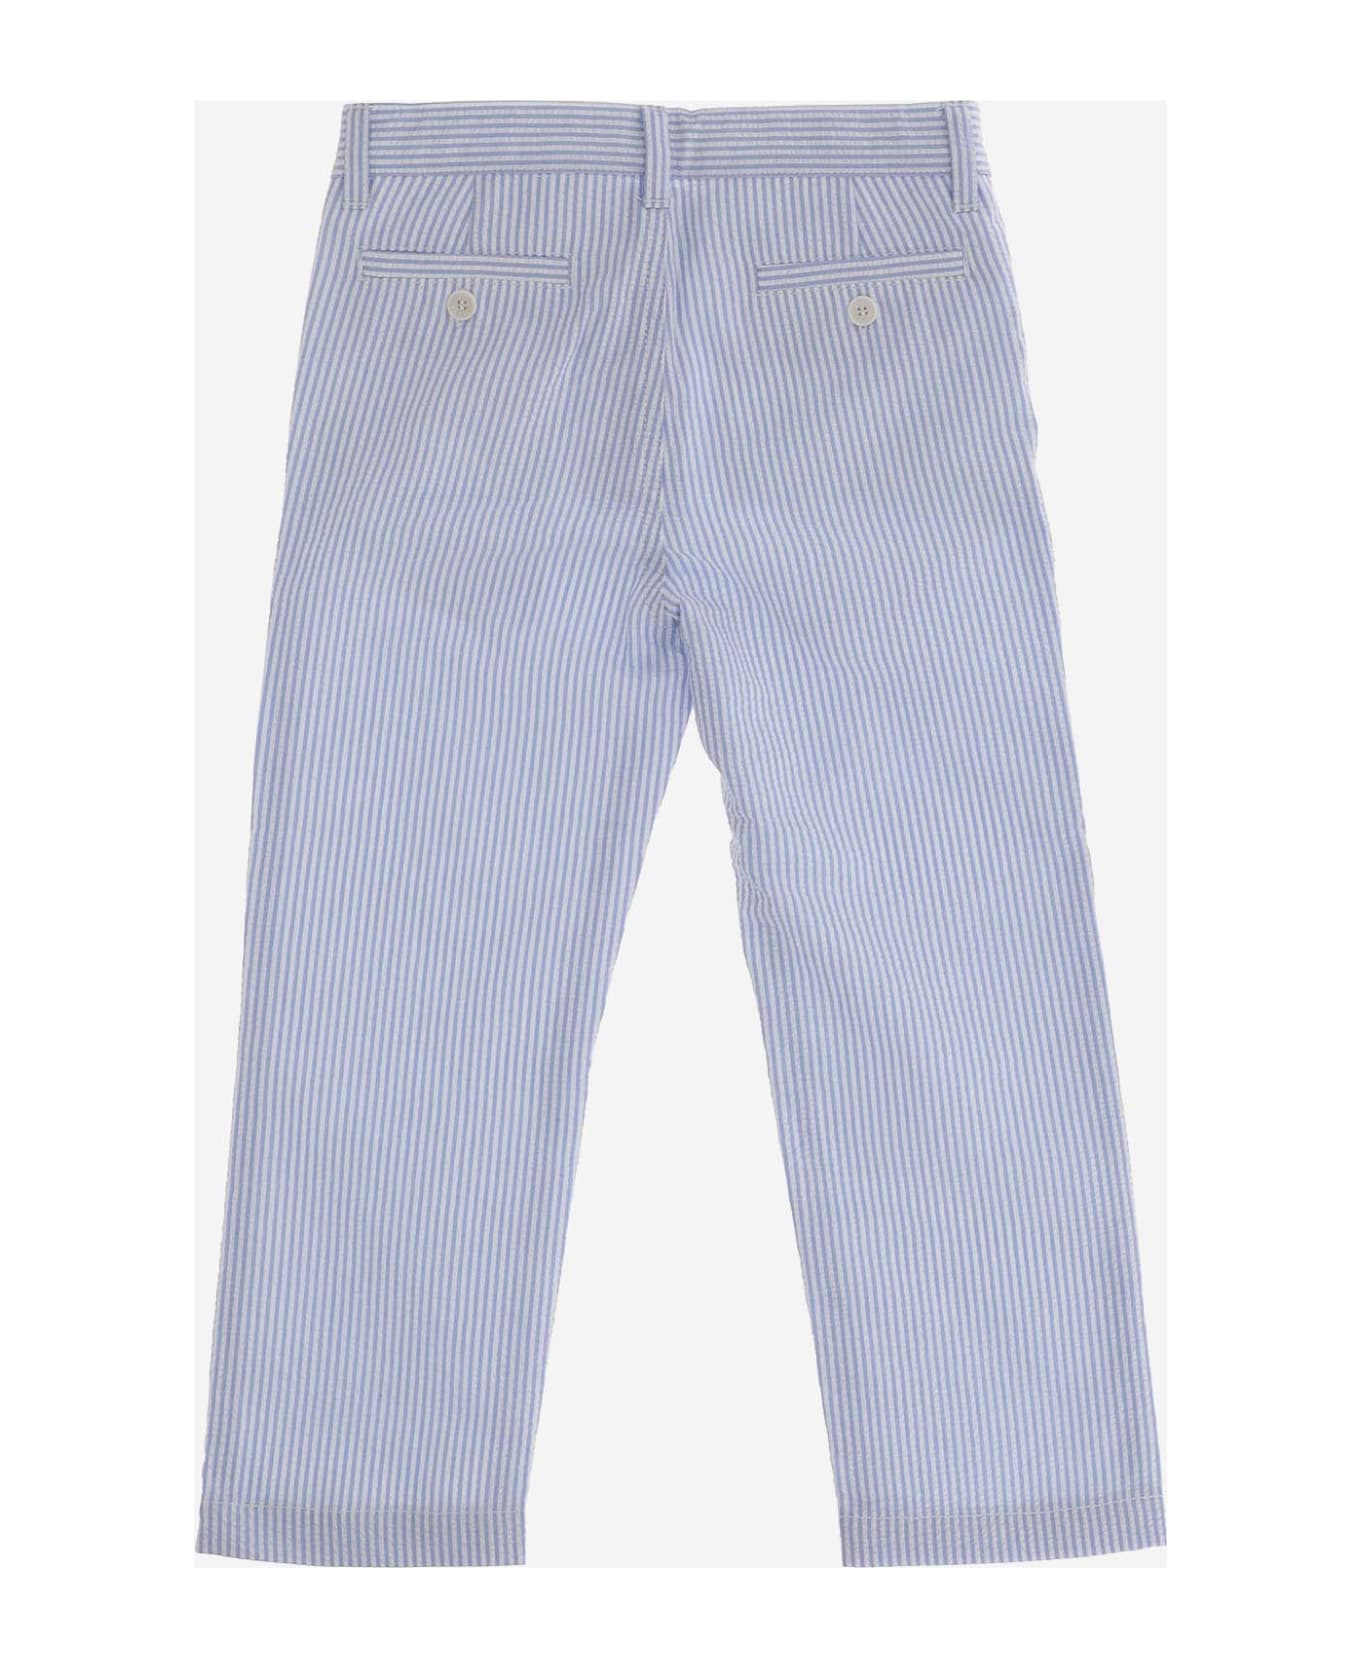 Il Gufo Cotton Pants With Striped Pattern - Clear Blue ボトムス